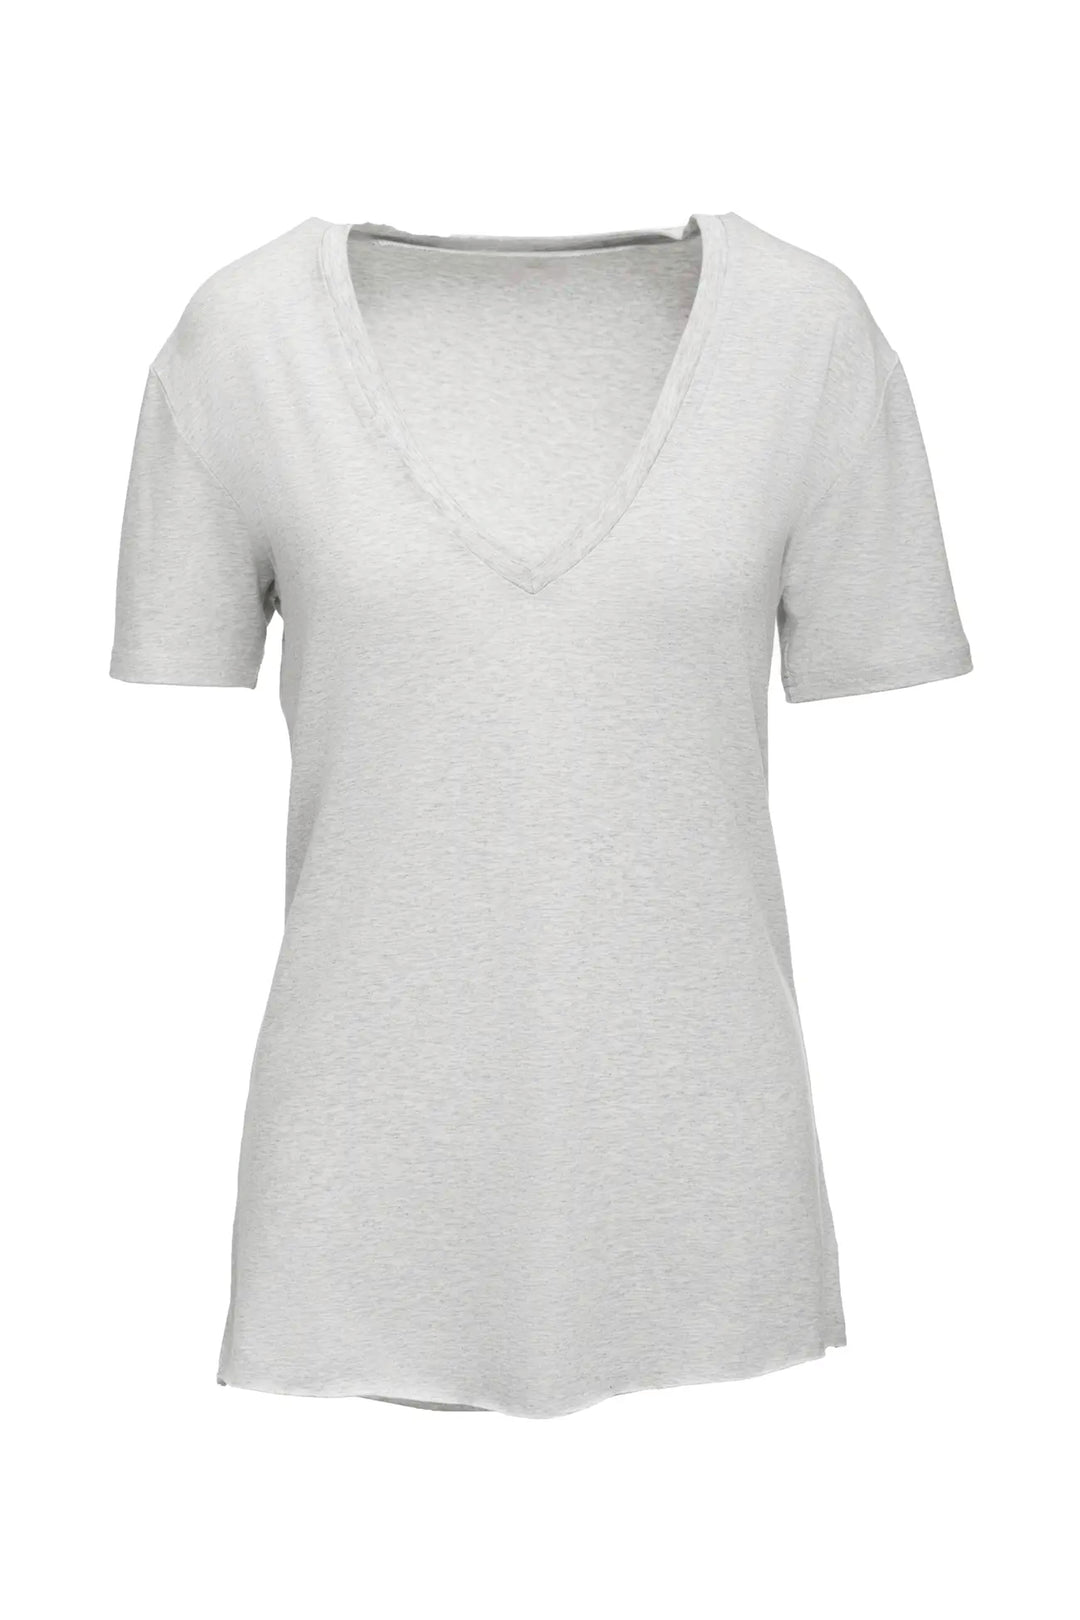 Light heather grey women's bamboo and cotton V neck T-shirt